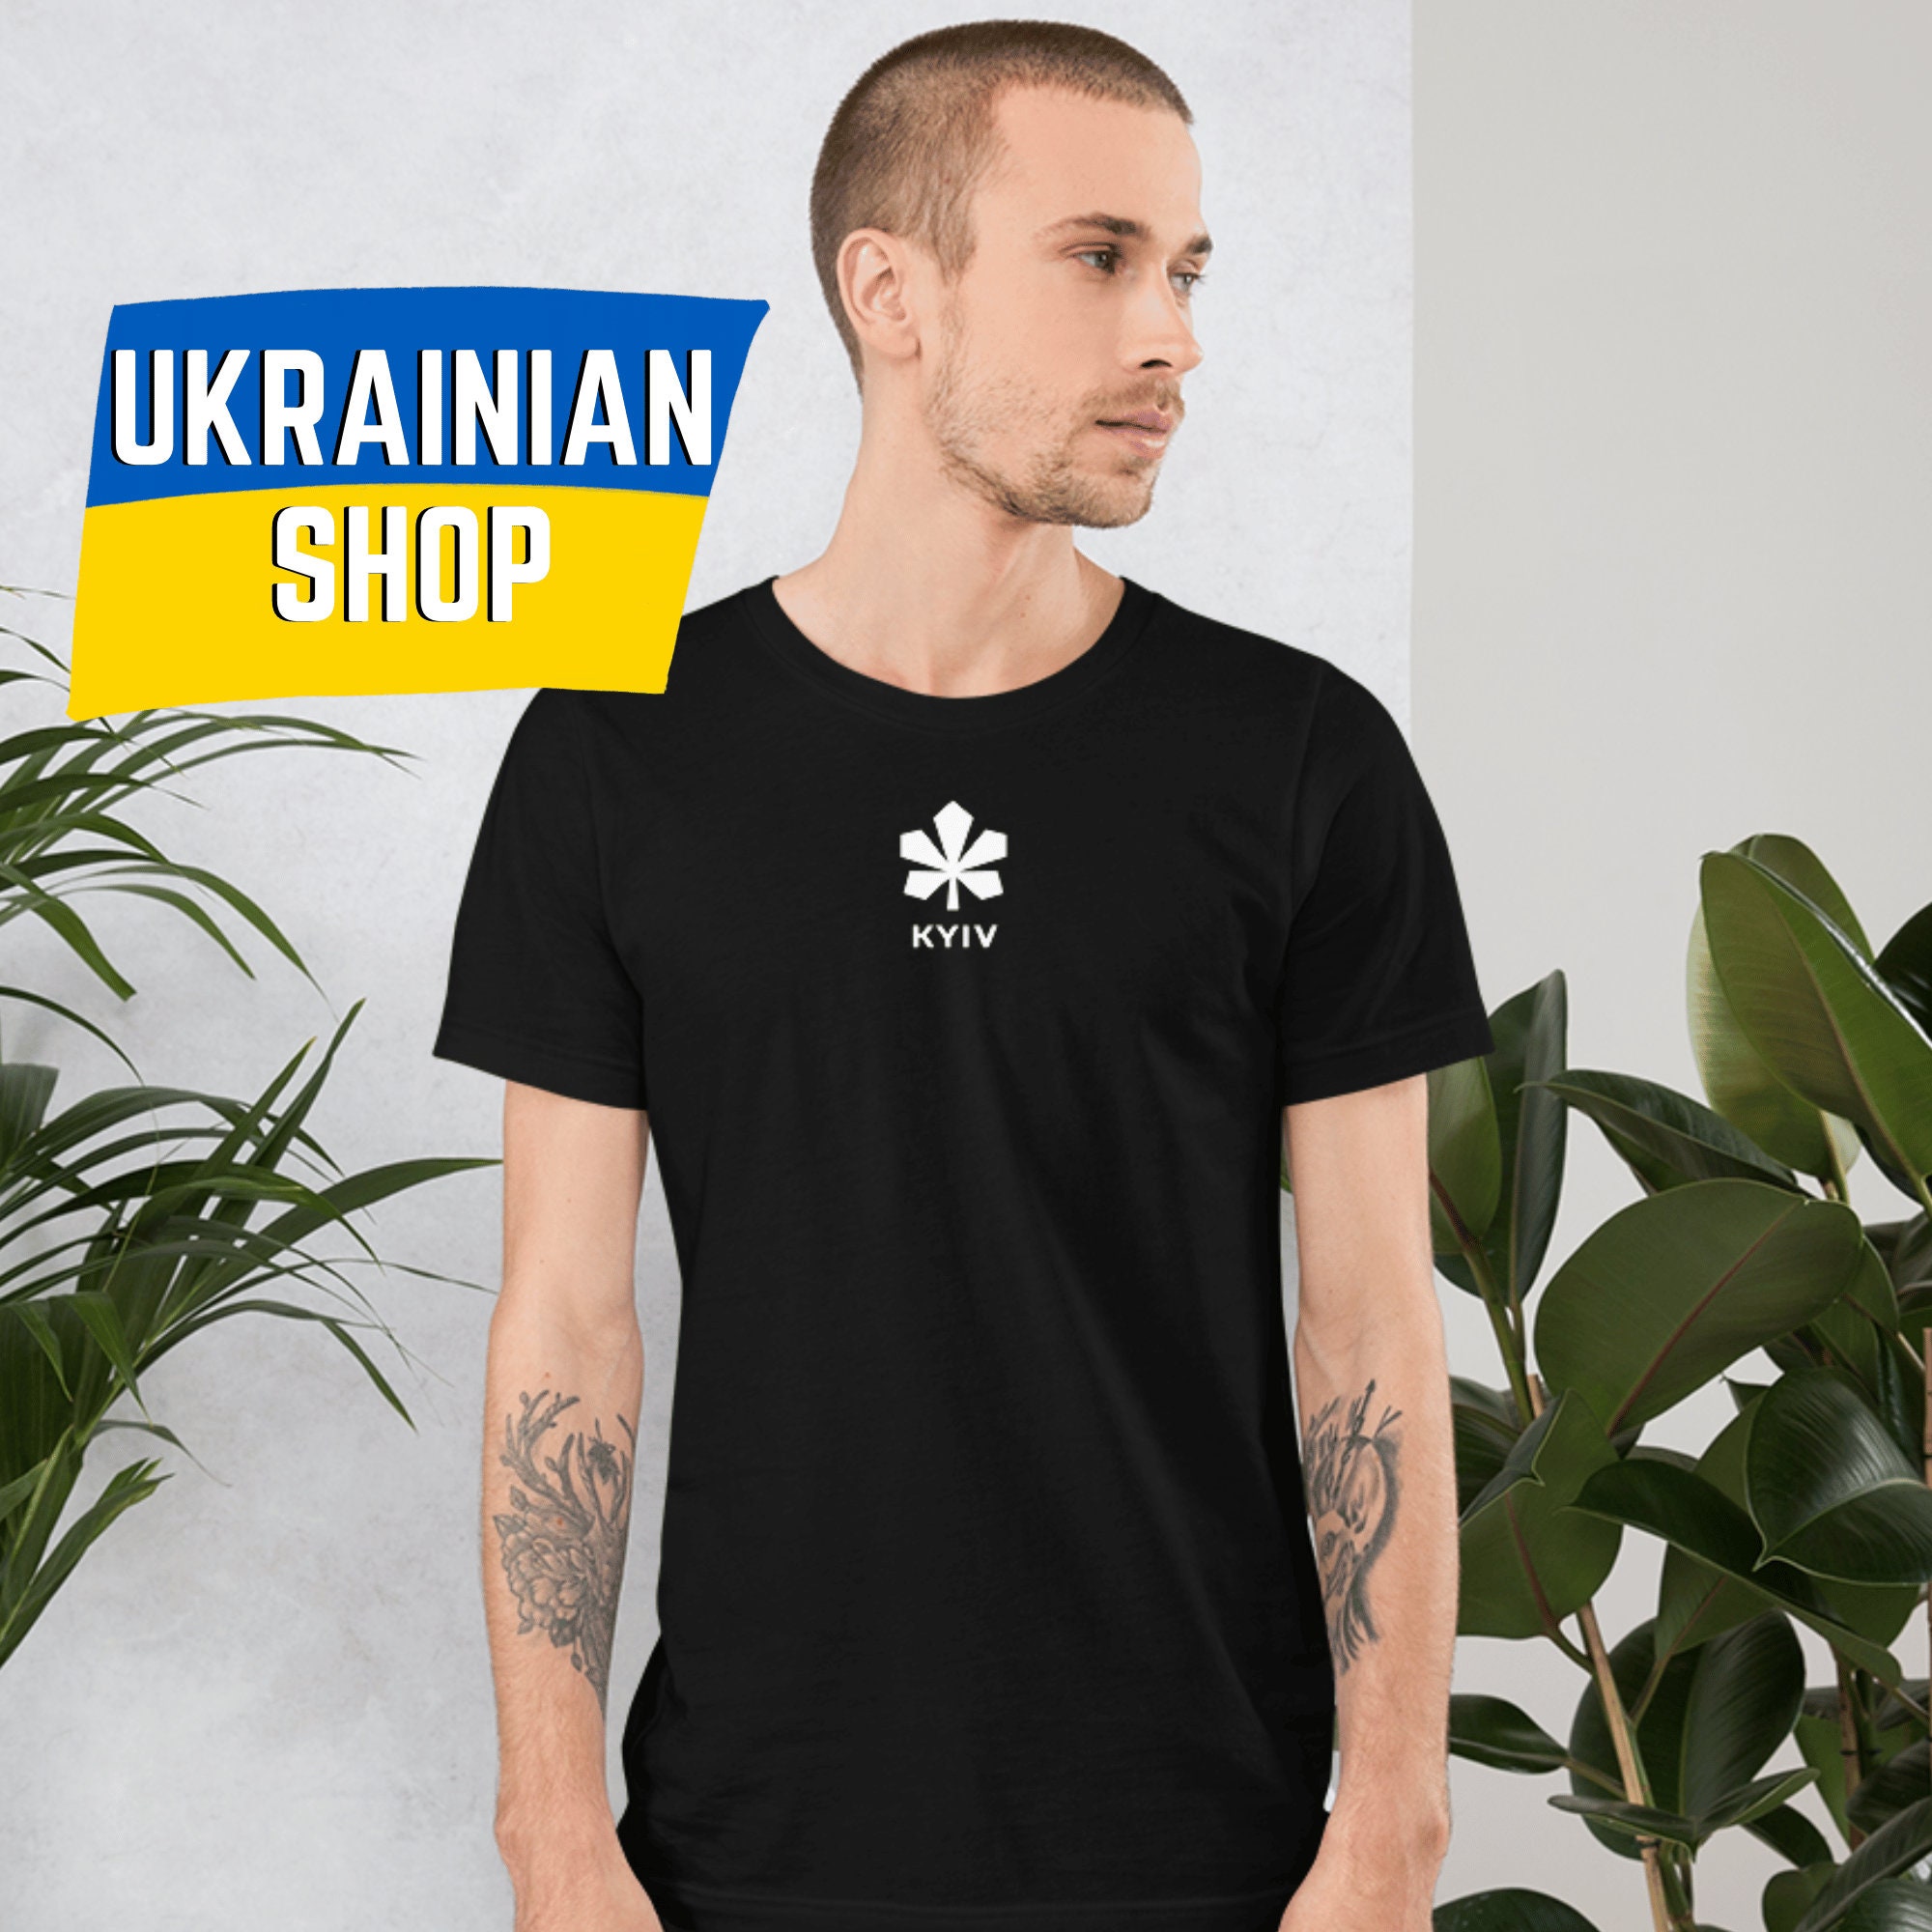 Ukraina Old National Louisville Strong Graphics Black T shirts For Men And  Women - Freedomdesign